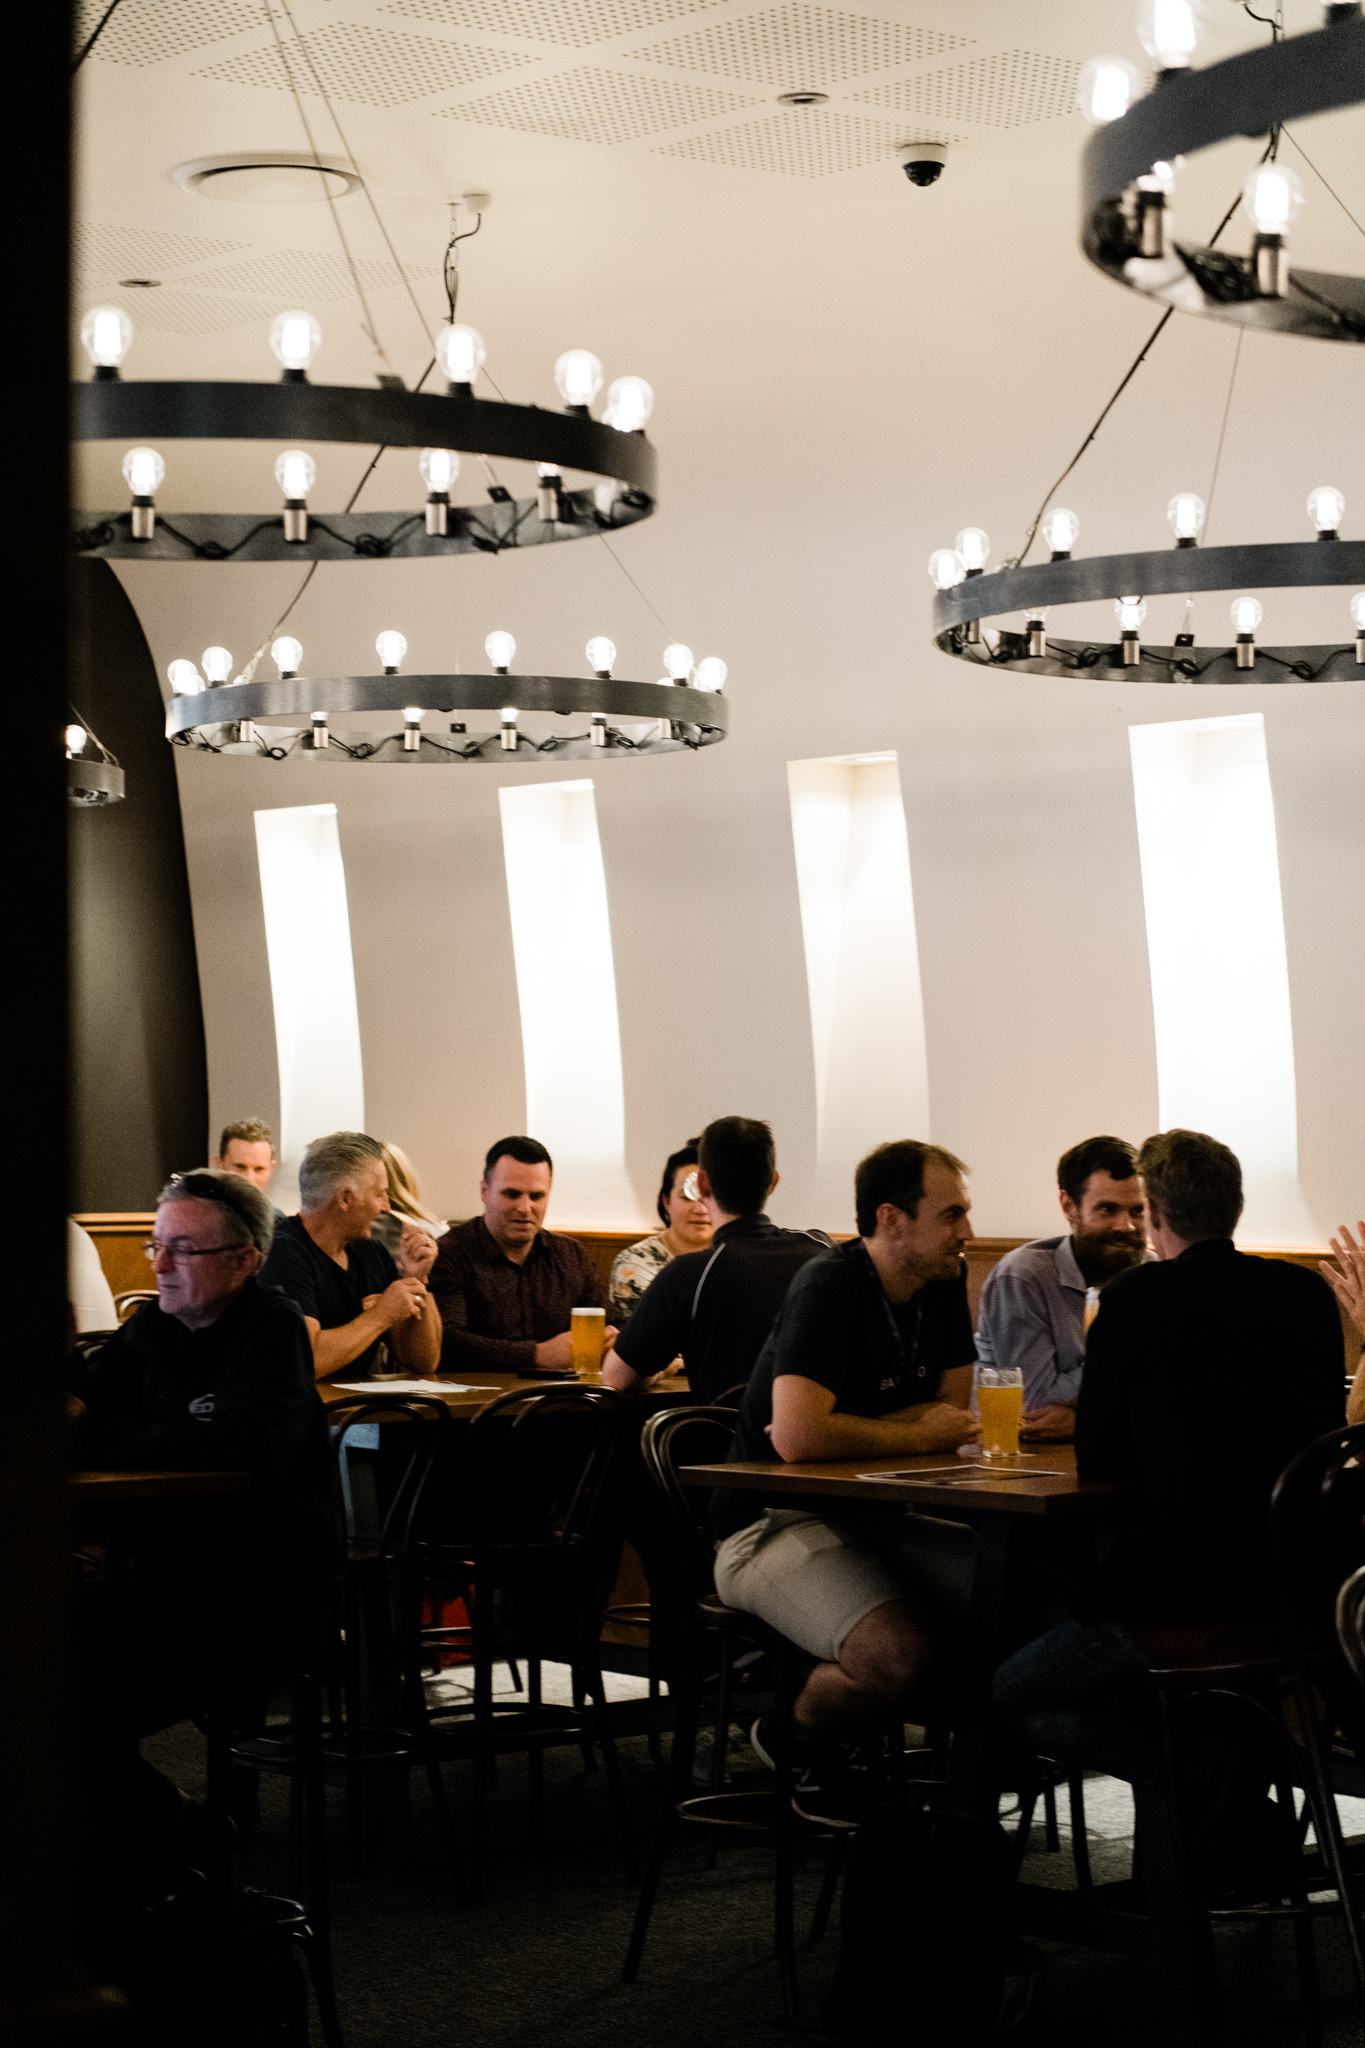 City Beer Hall. Photographed by Jillian McHugh. Image supplied